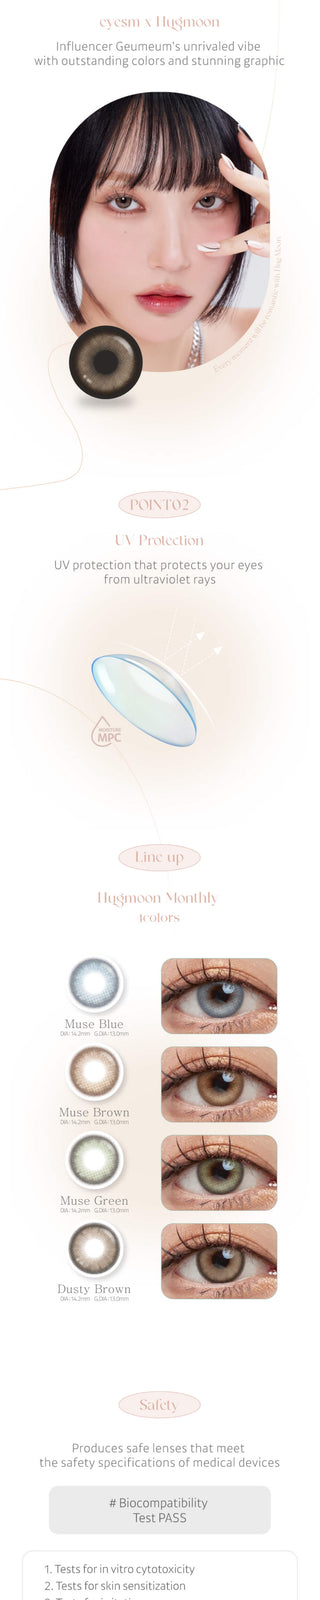 The Eyesm Hugmoon Dusty Brown contact lens hue from different perspectives on a model. different close-ups of eyes with the colour lens, displaying the subtle but natural change on dark brown, natural brown, and light brown eyes.